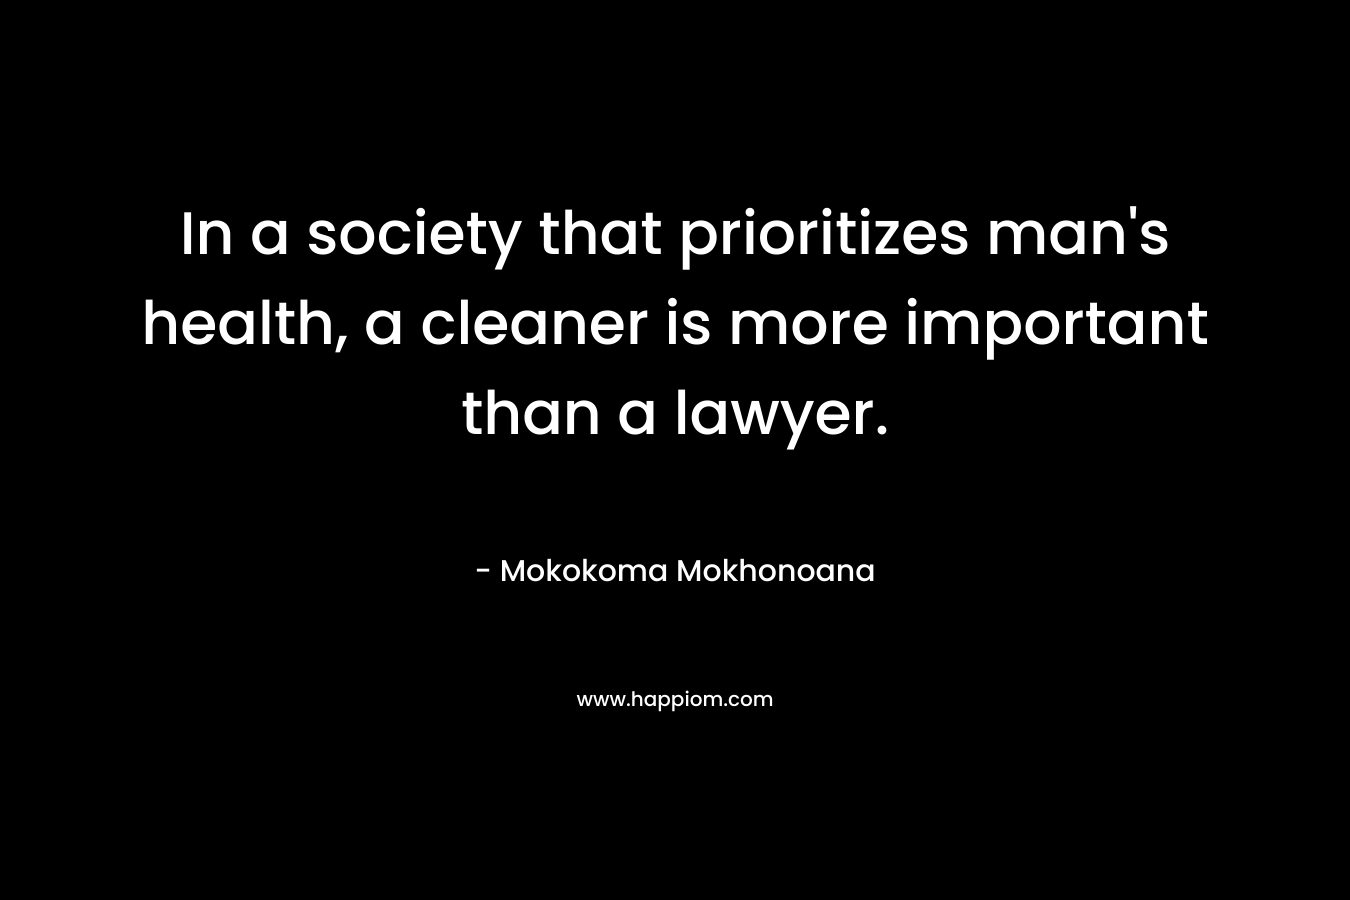 In a society that prioritizes man’s health, a cleaner is more important than a lawyer. – Mokokoma Mokhonoana